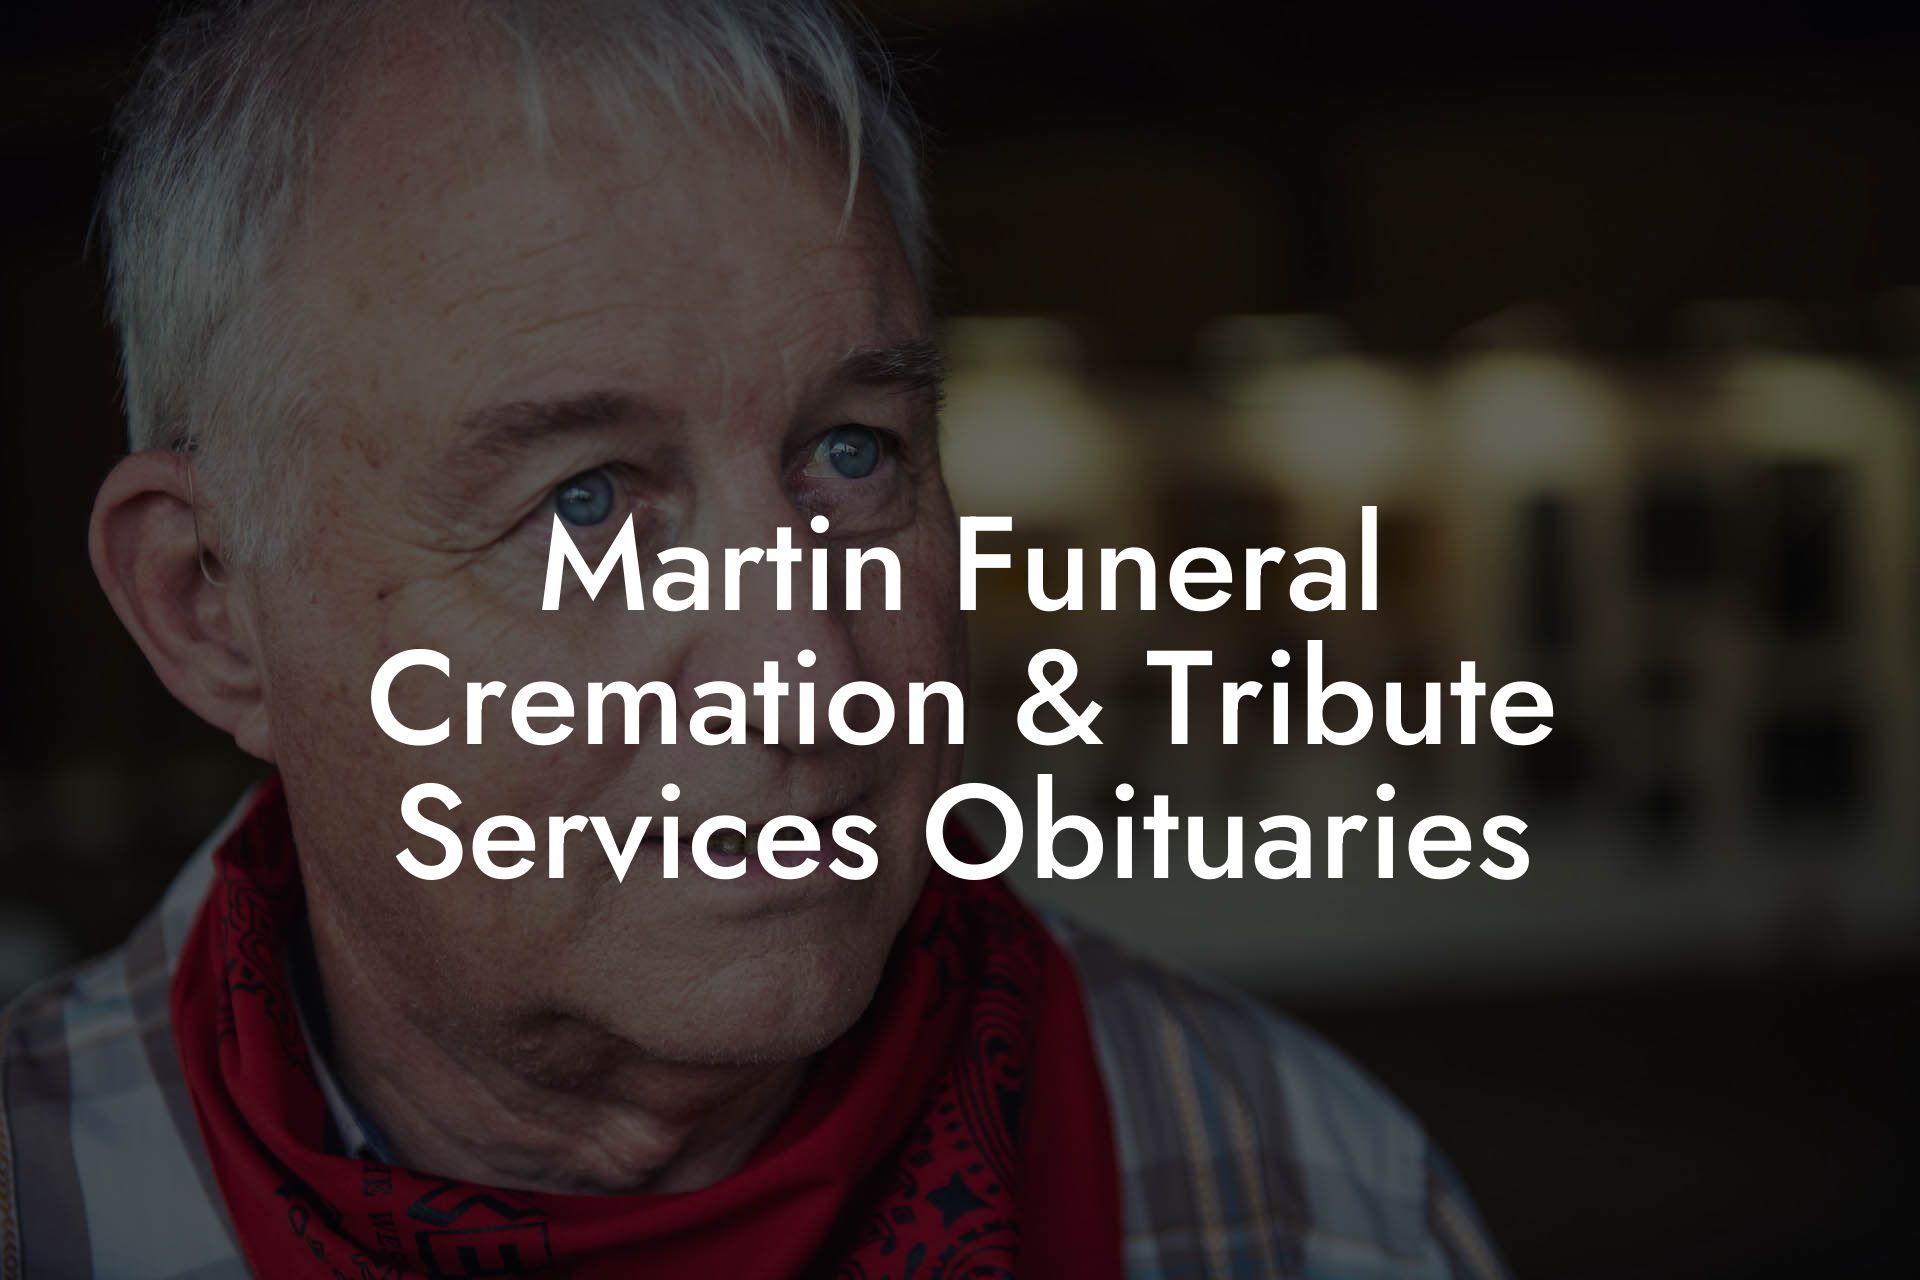 Martin Funeral Cremation & Tribute Services Obituaries - Eulogy Assistant